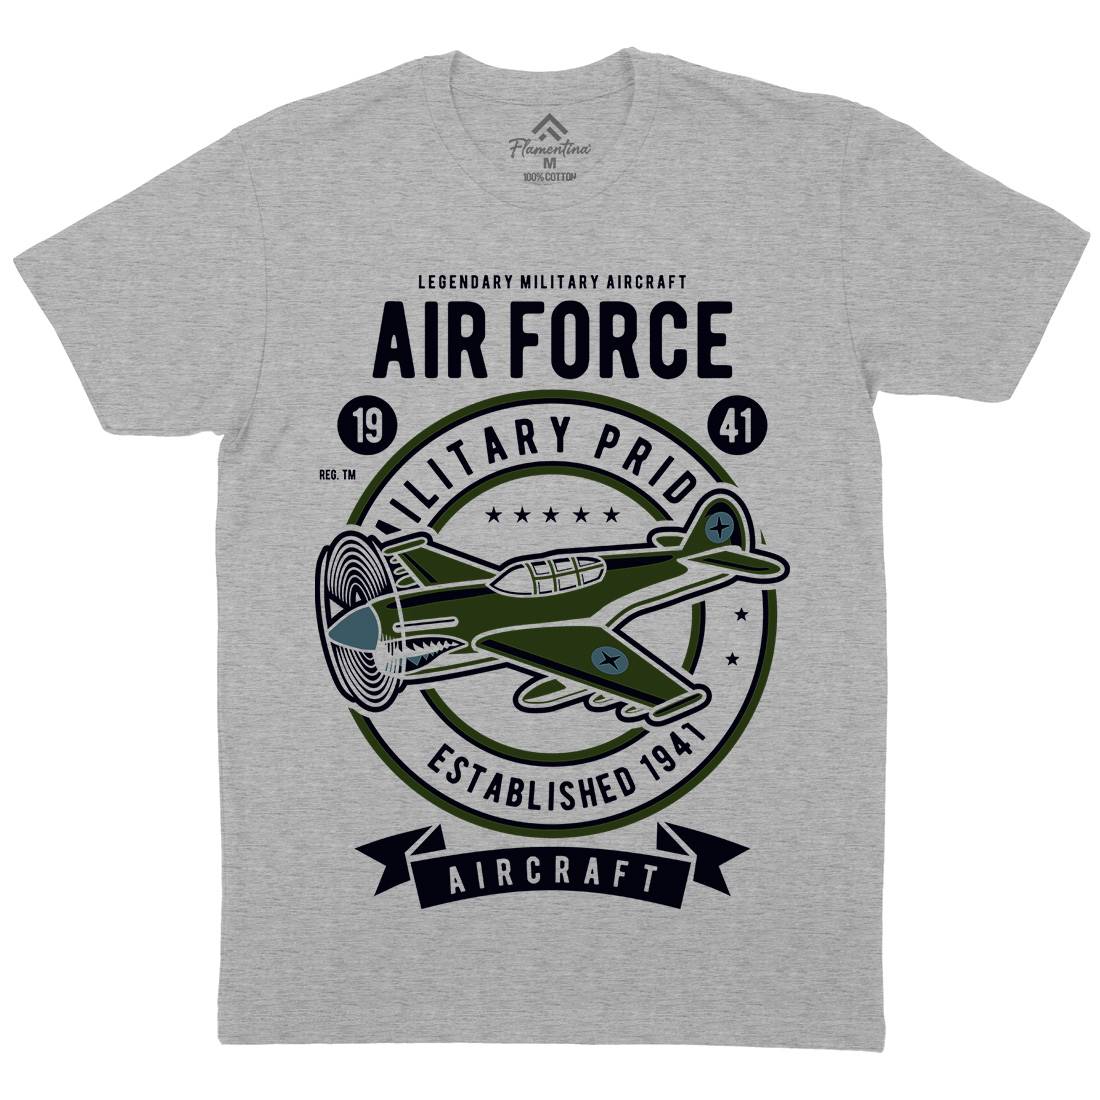 Air Force Mens Crew Neck T-Shirt Army D502